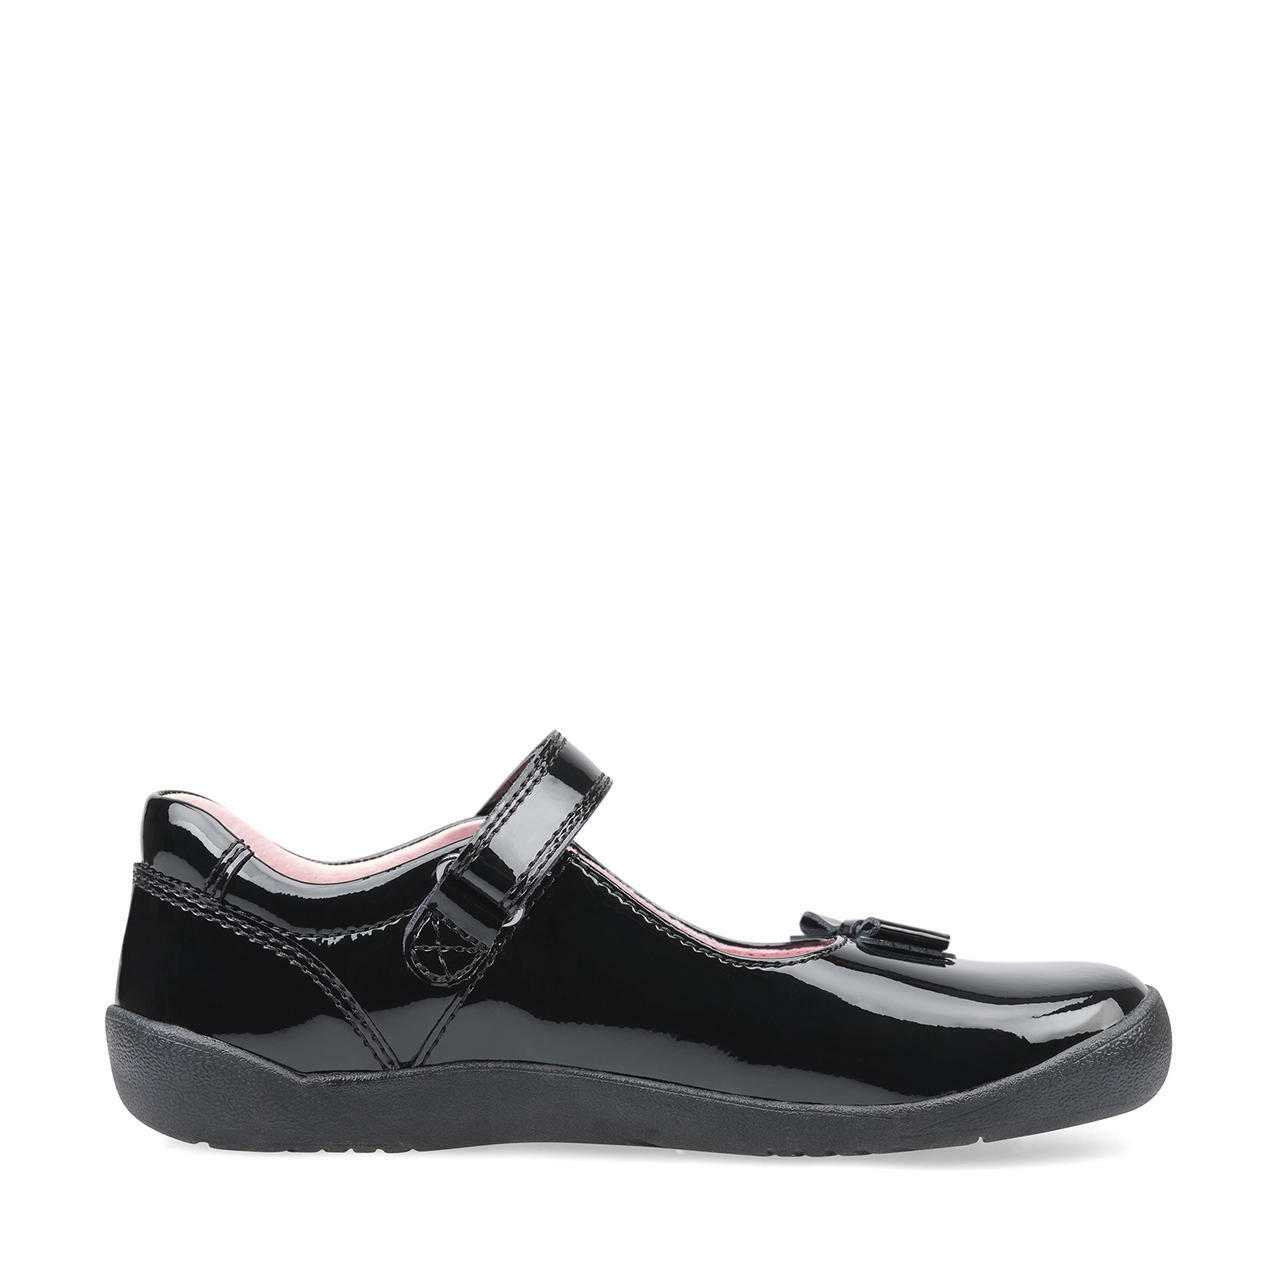 A girls Mary Jane school shoe by Start Rite, style Giggle, in black patent with velcro fastening. Inner side view.